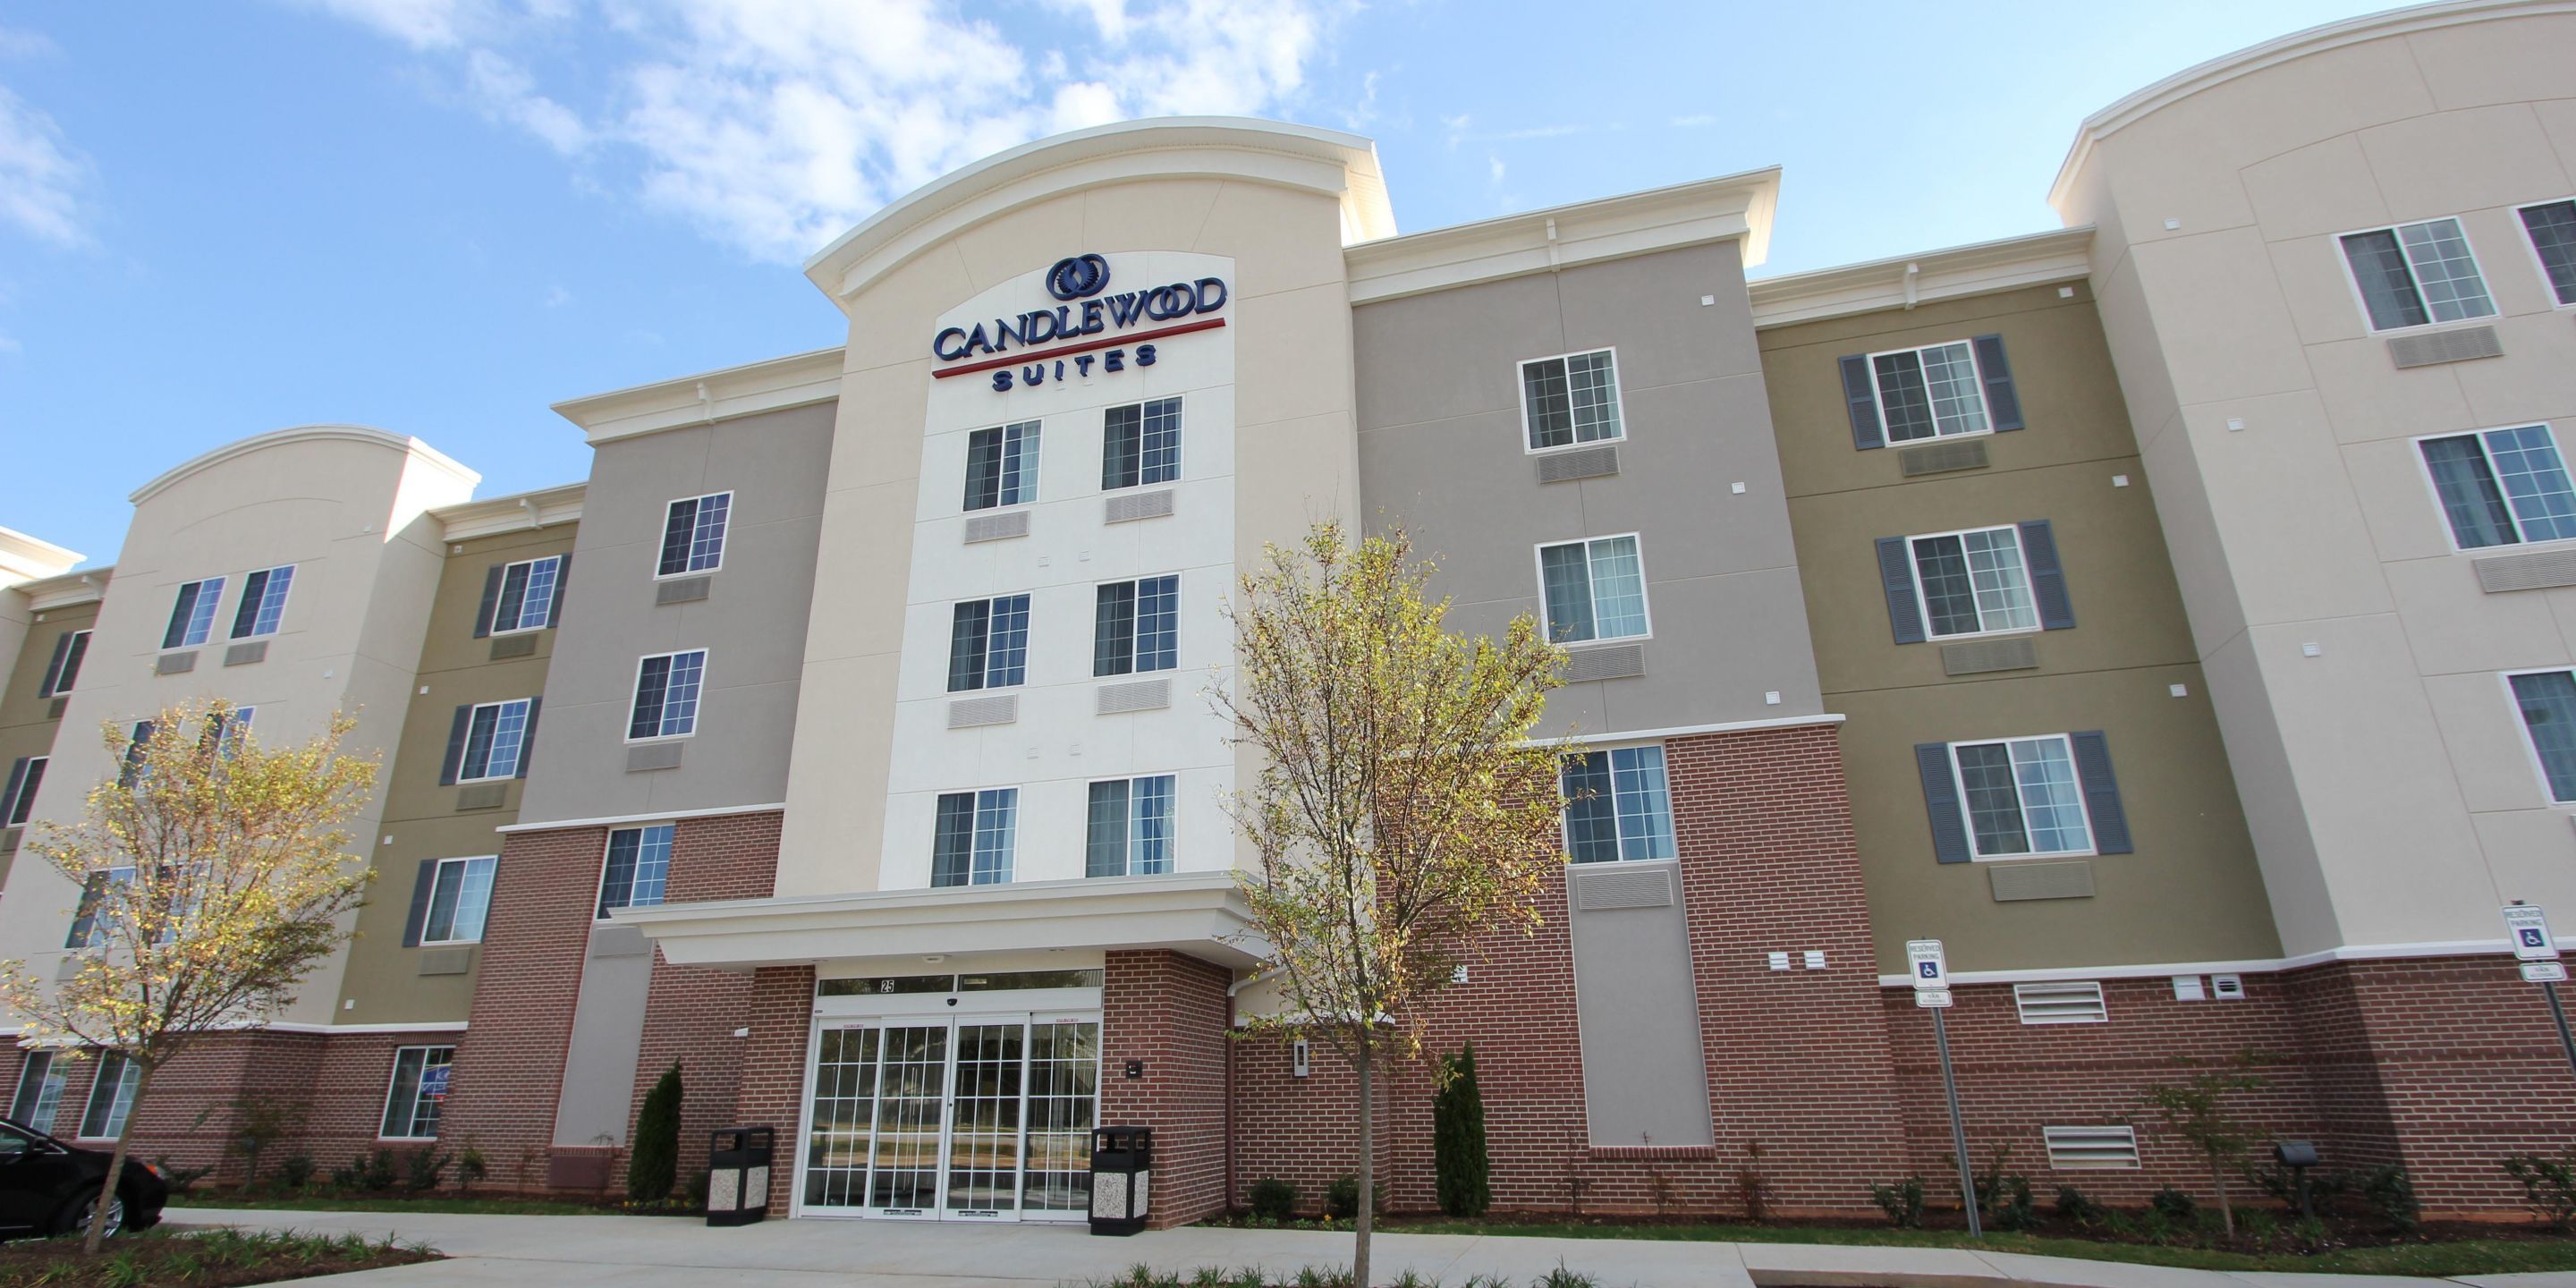 Photo of Candlewood Suites Greenville, Greenville, SC